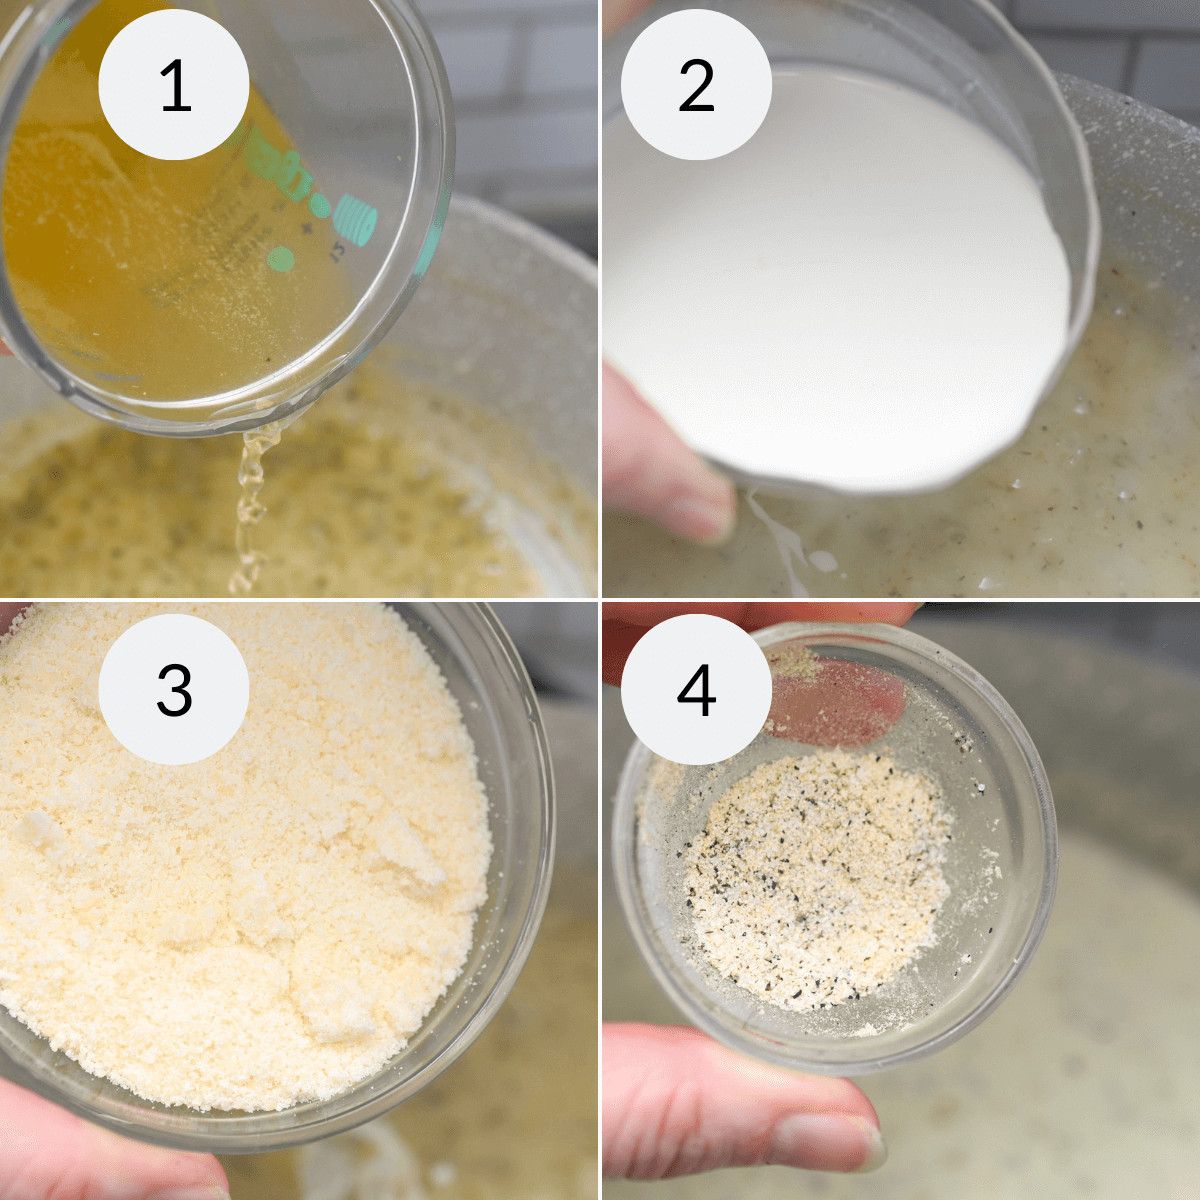 Four-step image showing the preparation of garlic parmesan sauce: 1) pouring liquid into a bowl, 2) stirring milk in a bowl, 3) adding dry ingredients, 4